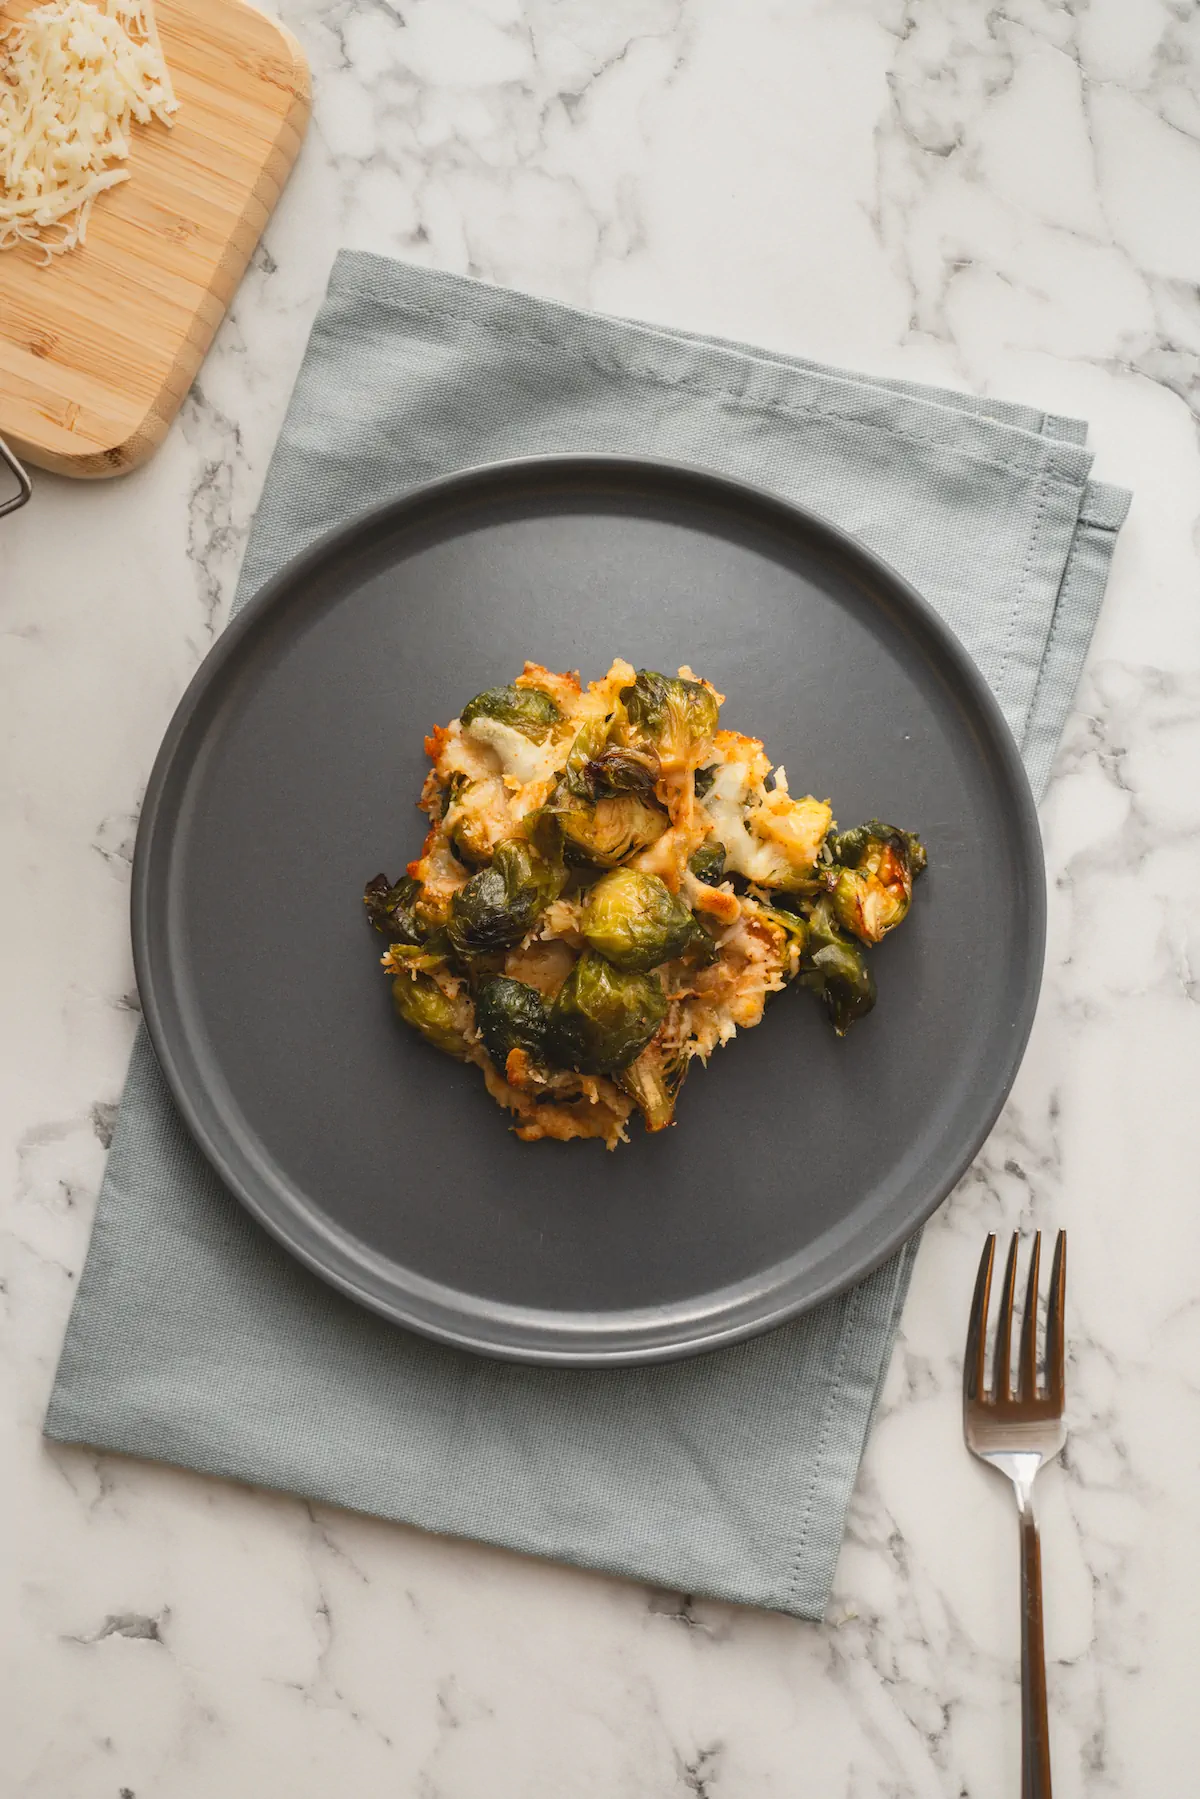 Keto-friendly Brussels sprouts casserole served on a plate.